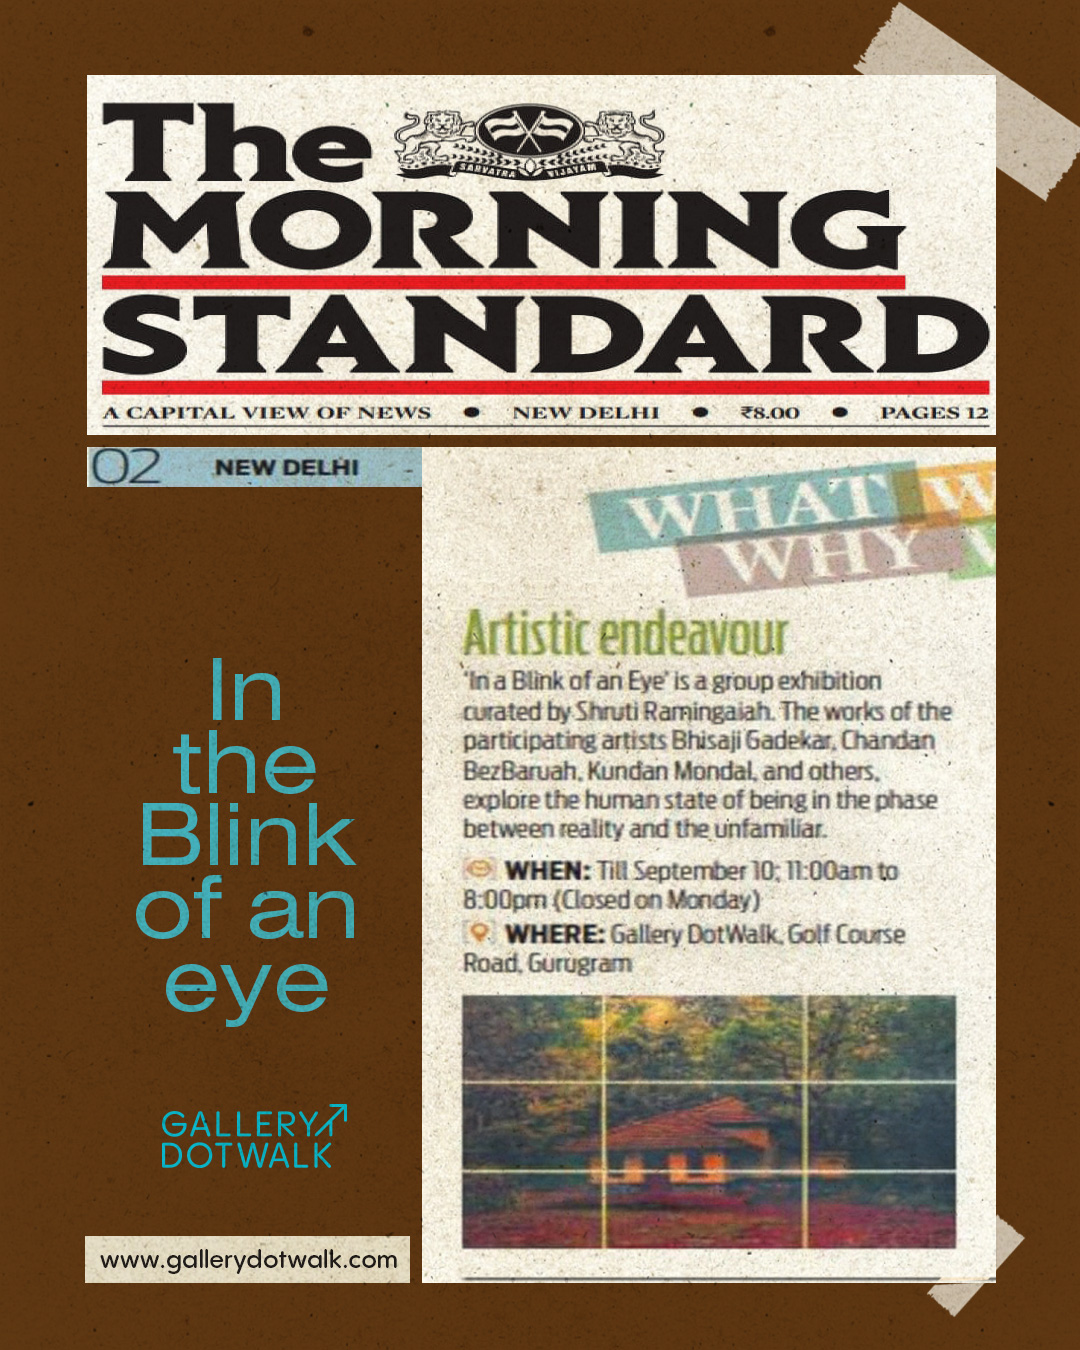 The morning standard